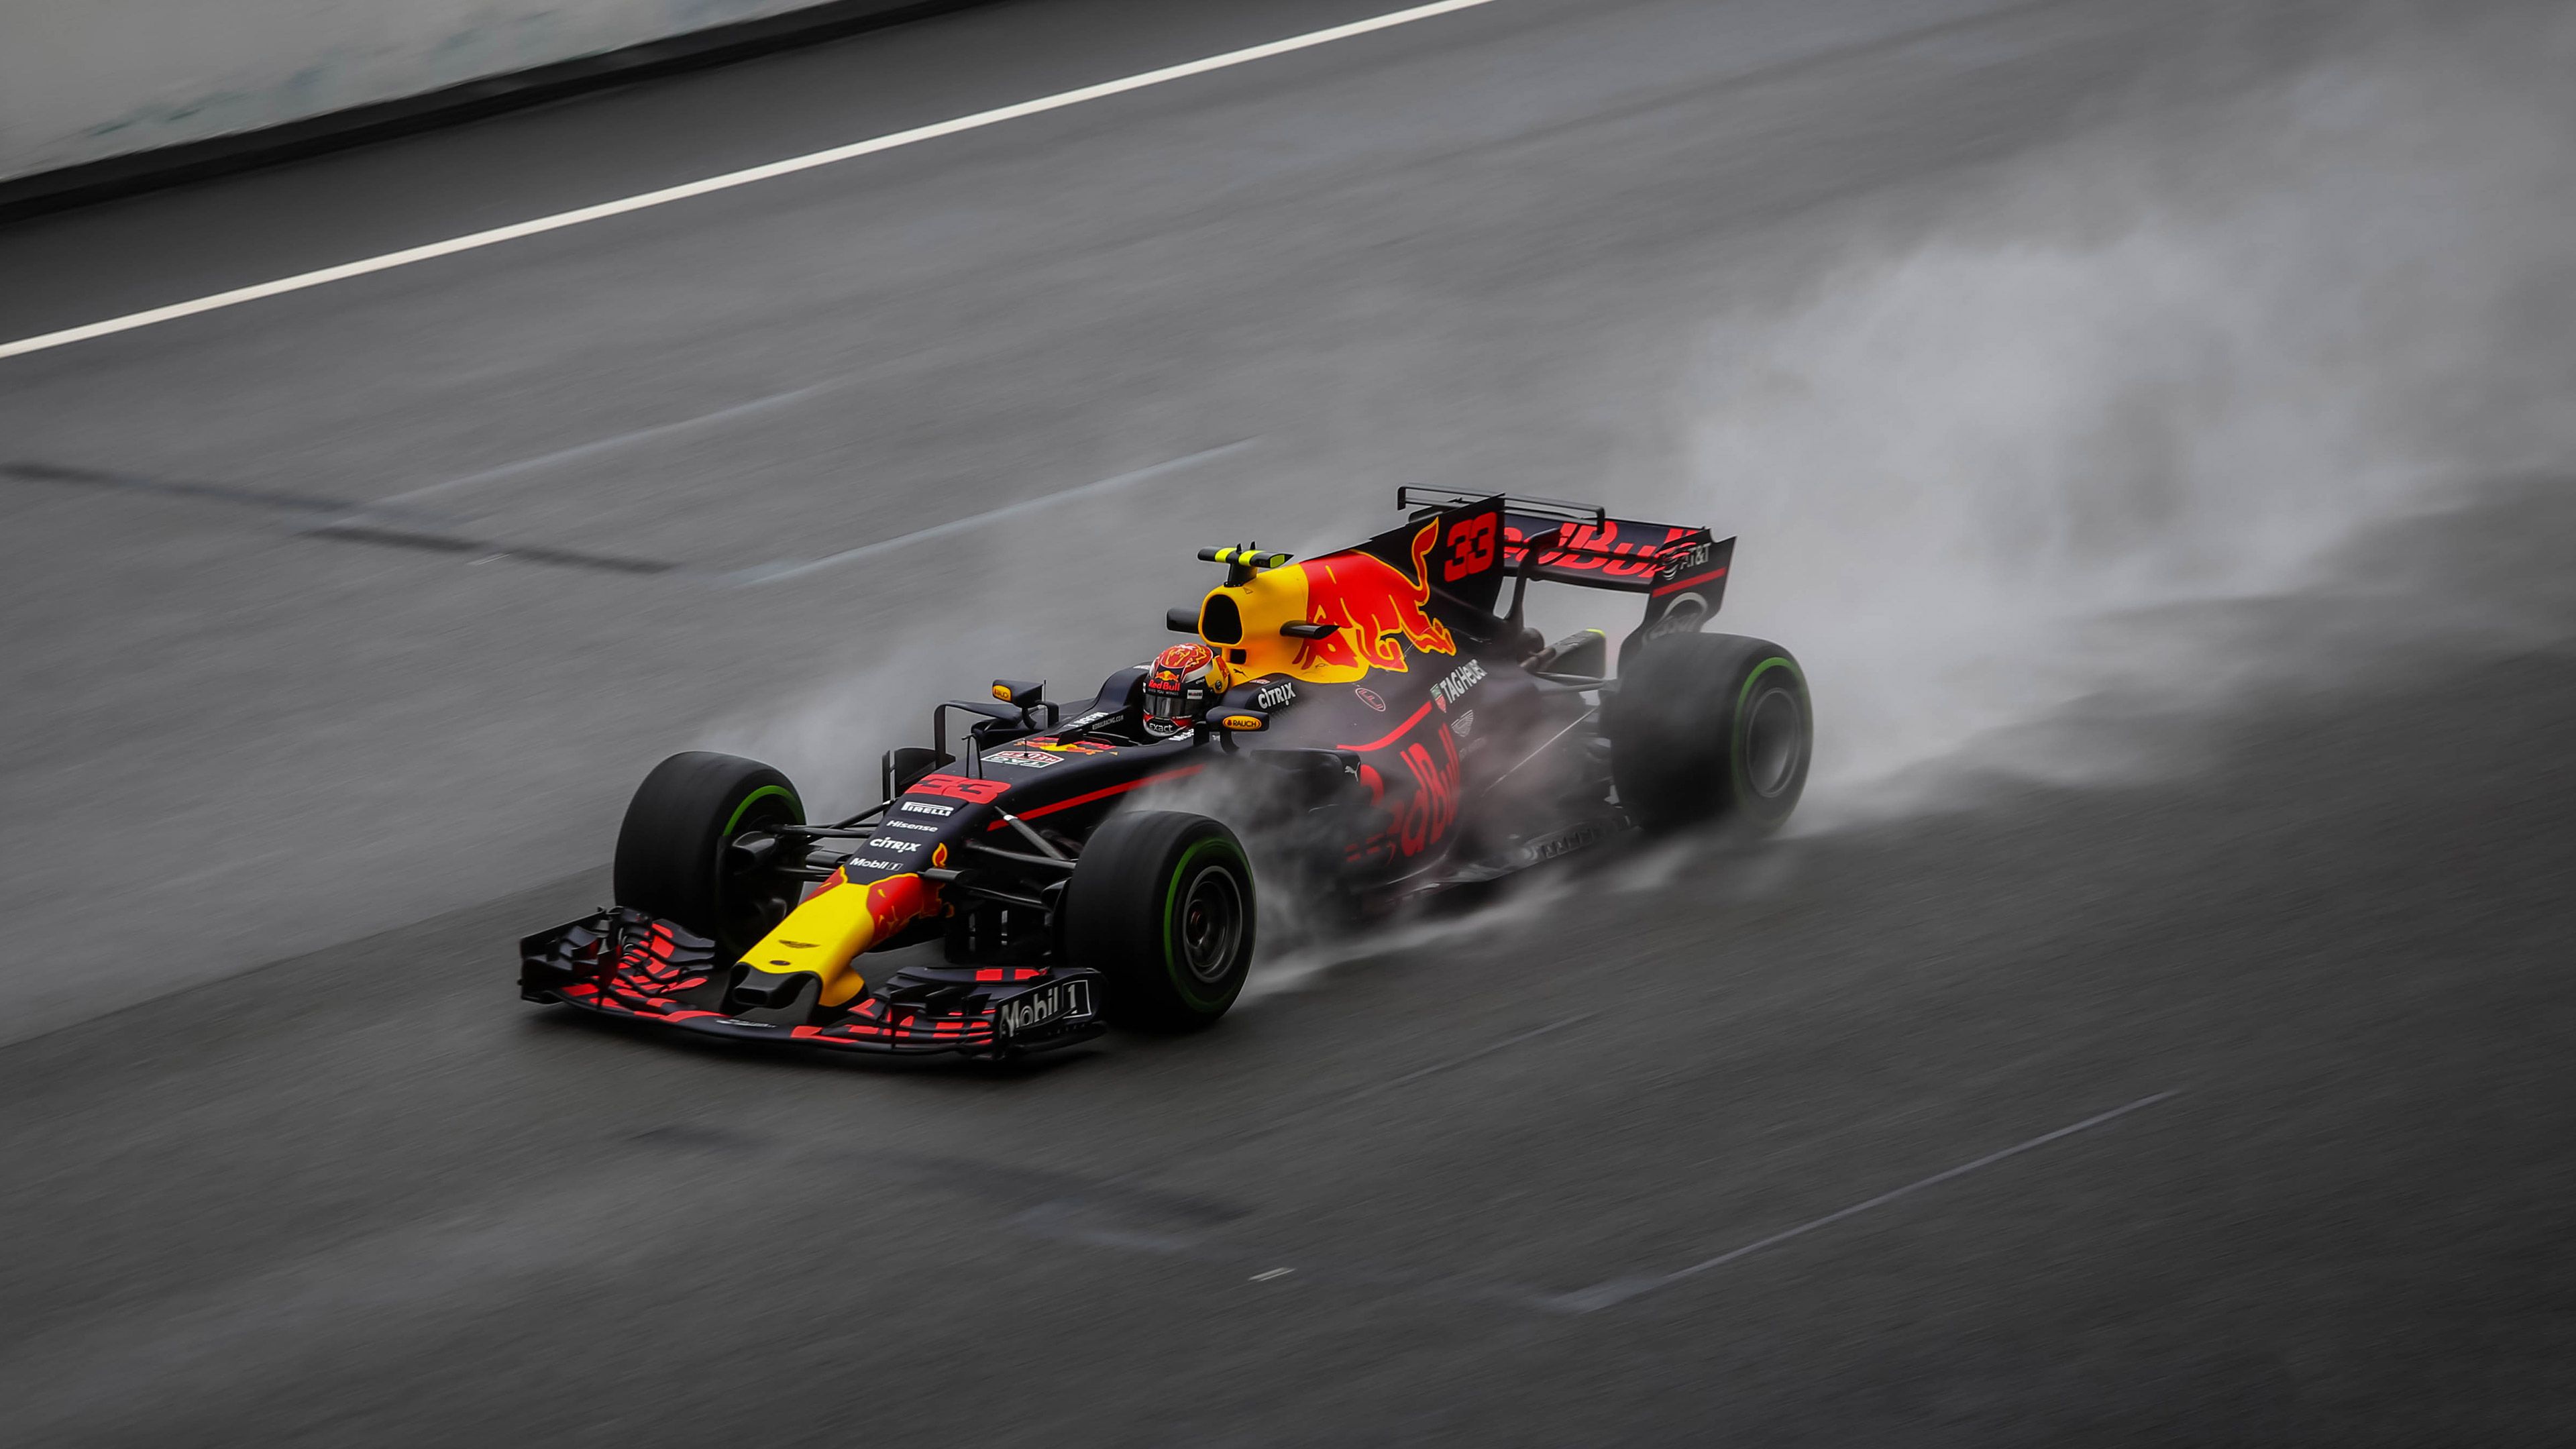 Wallpapers 4k 2017 Red Bull RB13 4k cars wallpapers, f1 wallpapers, racing wallpapers, track wallpapers